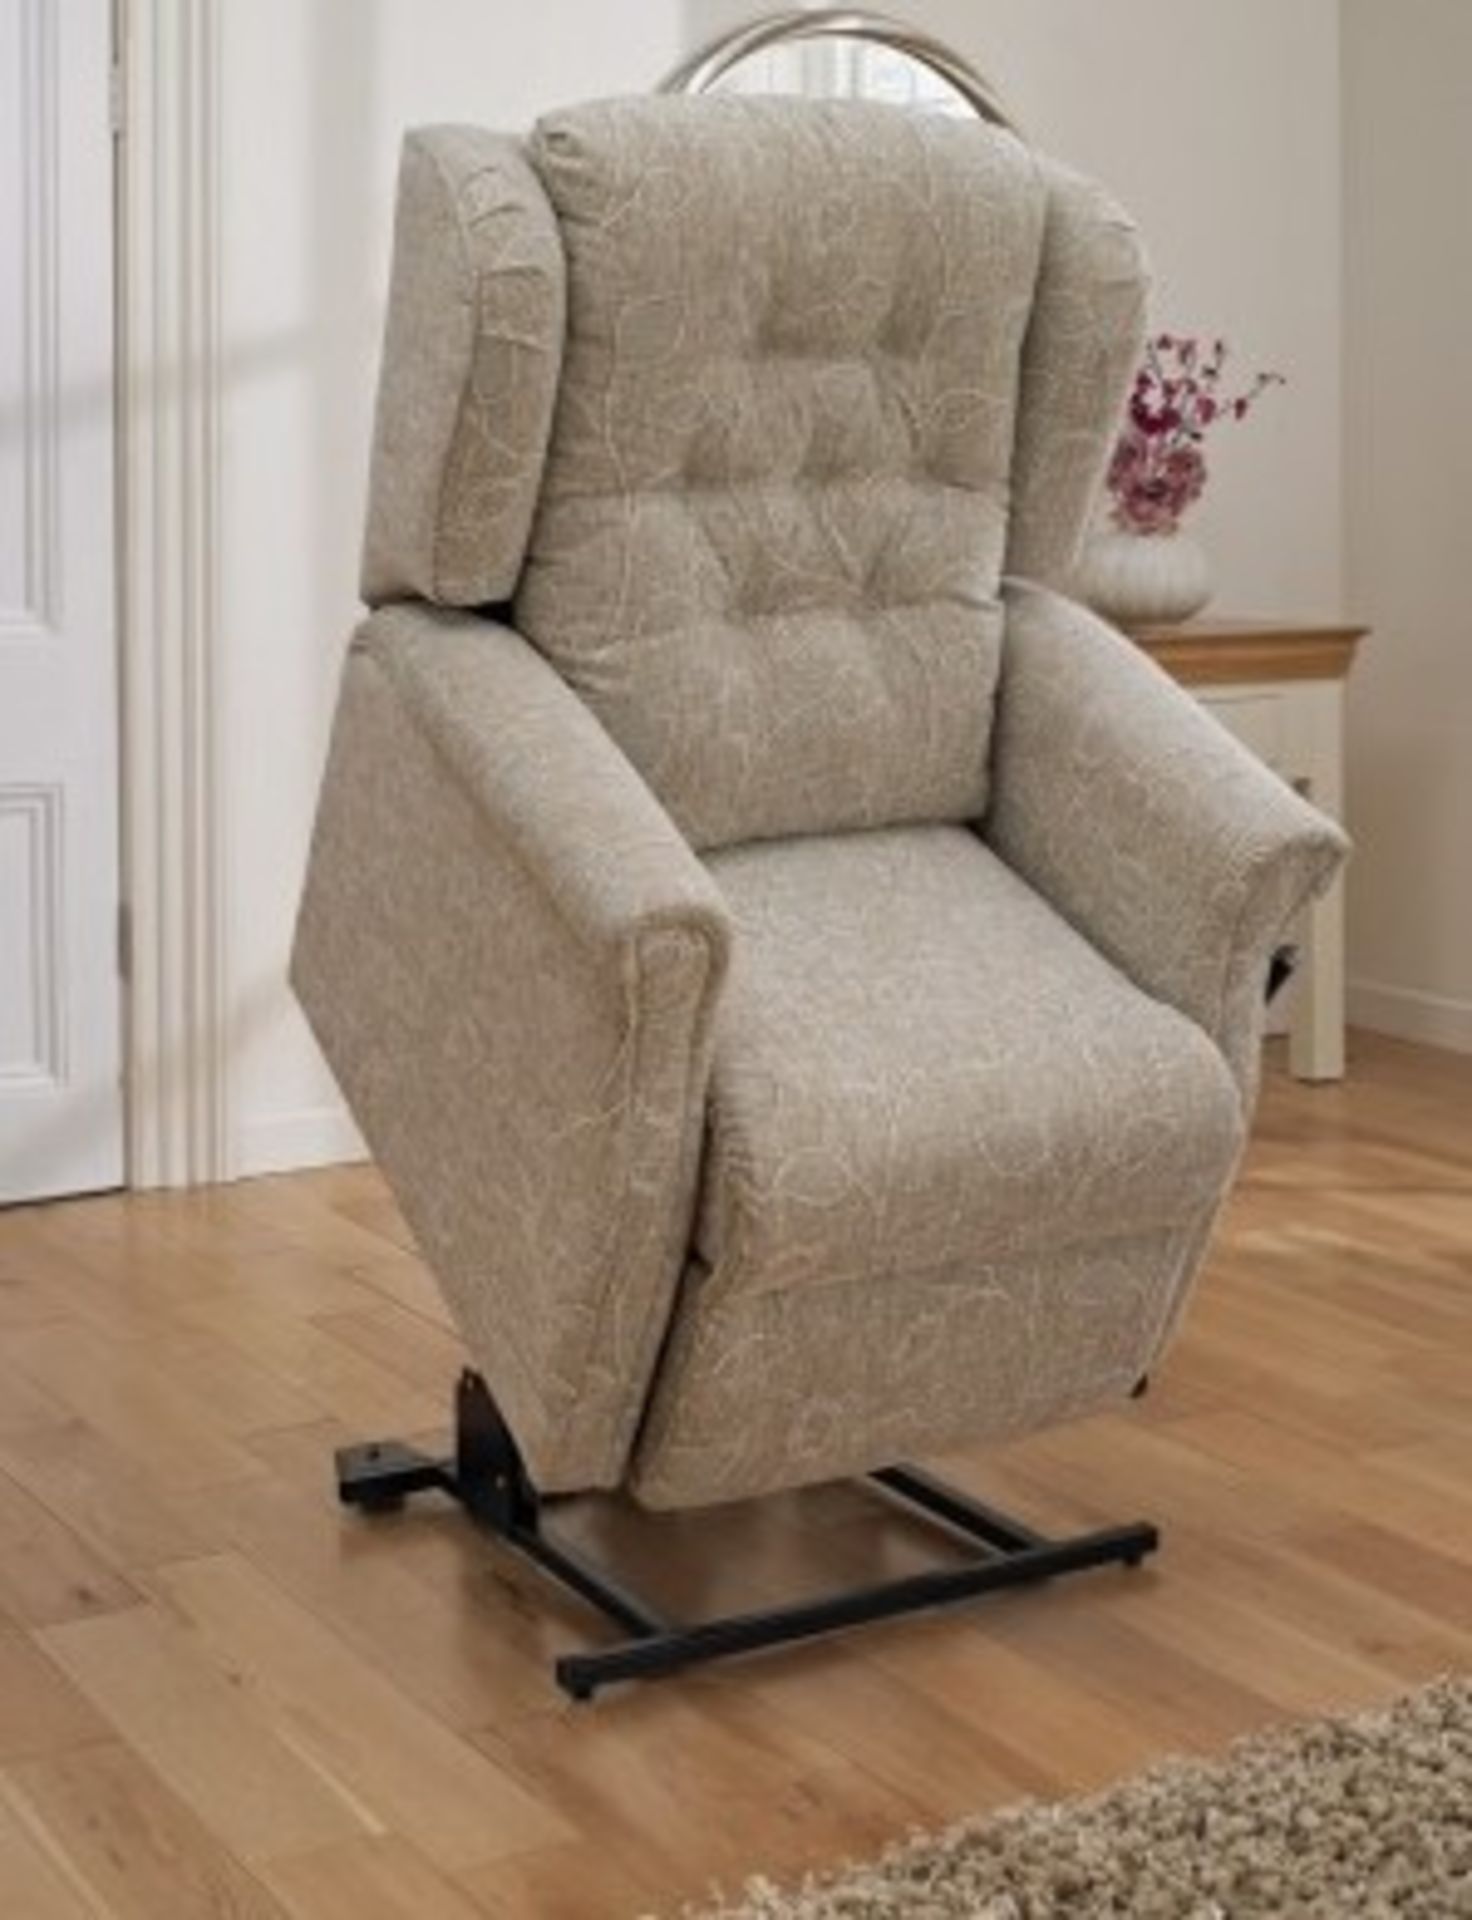 RADFORD RISE AND RECLINE ELECTRIC CHAIR